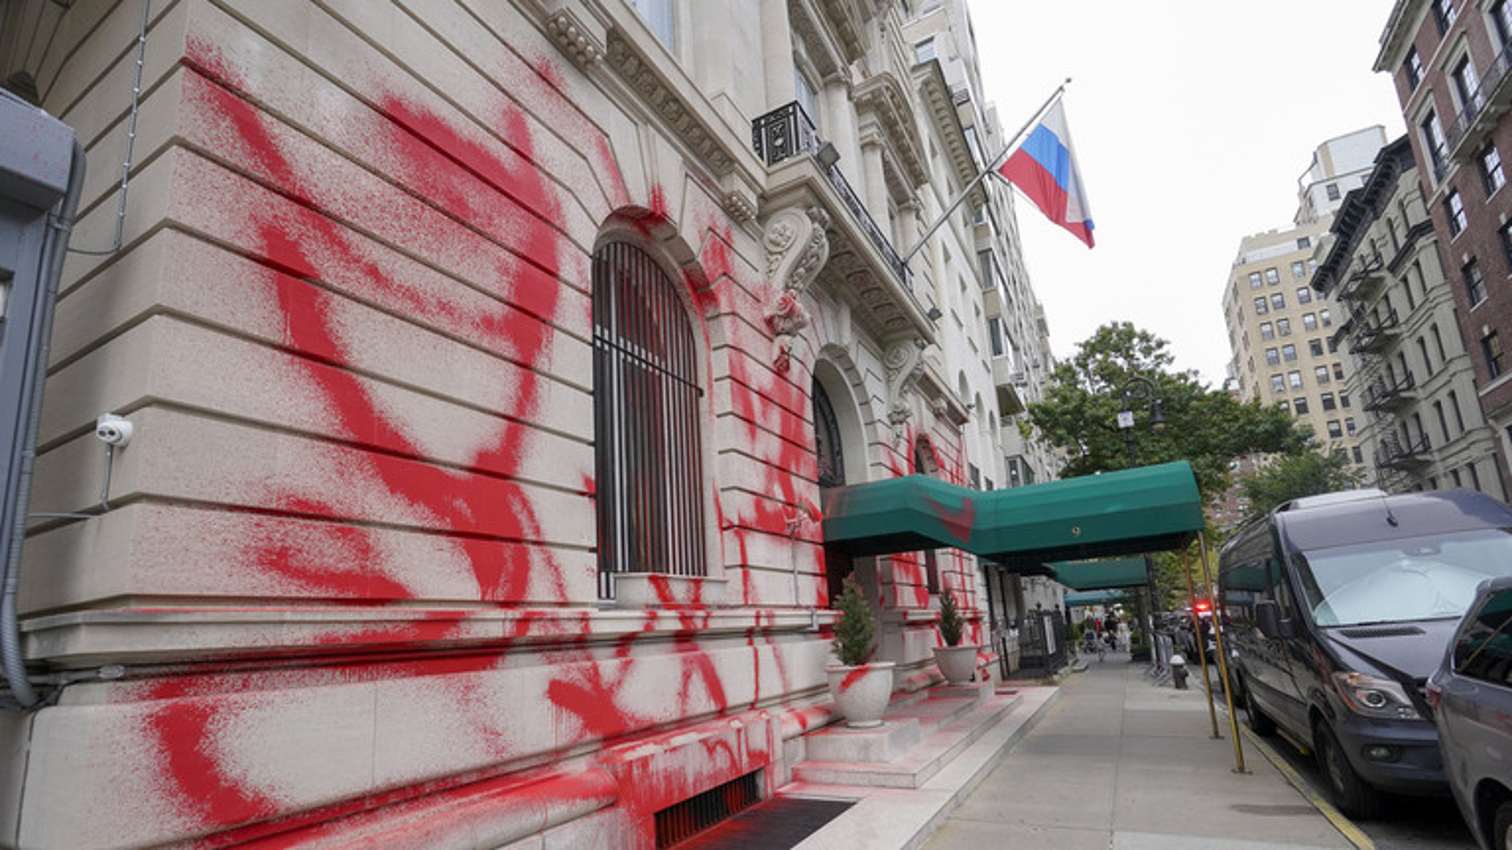 Russian consulate in New York City vandalized on September 30, 2022. Photo: AP / Mary Altaffer.